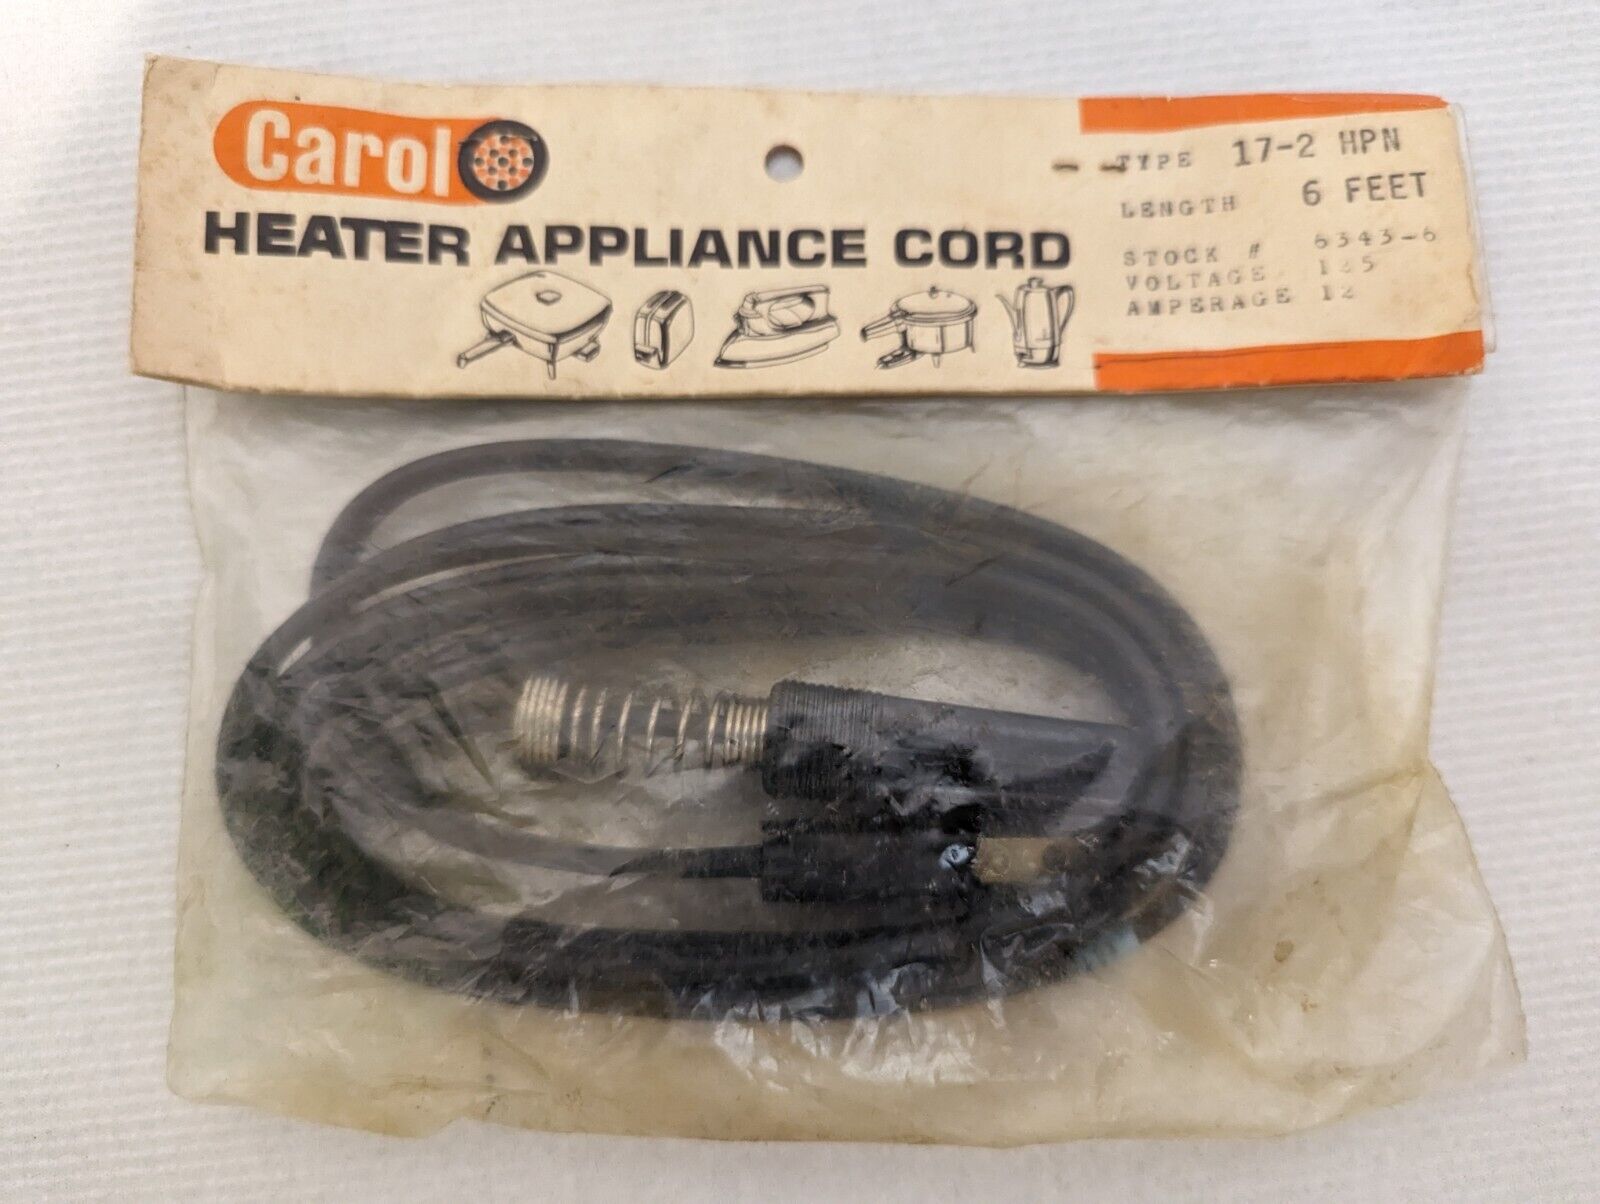 Carol Heater Appliance Cord Type 17-2 120 volts 12 amps NOS VTG Sealed